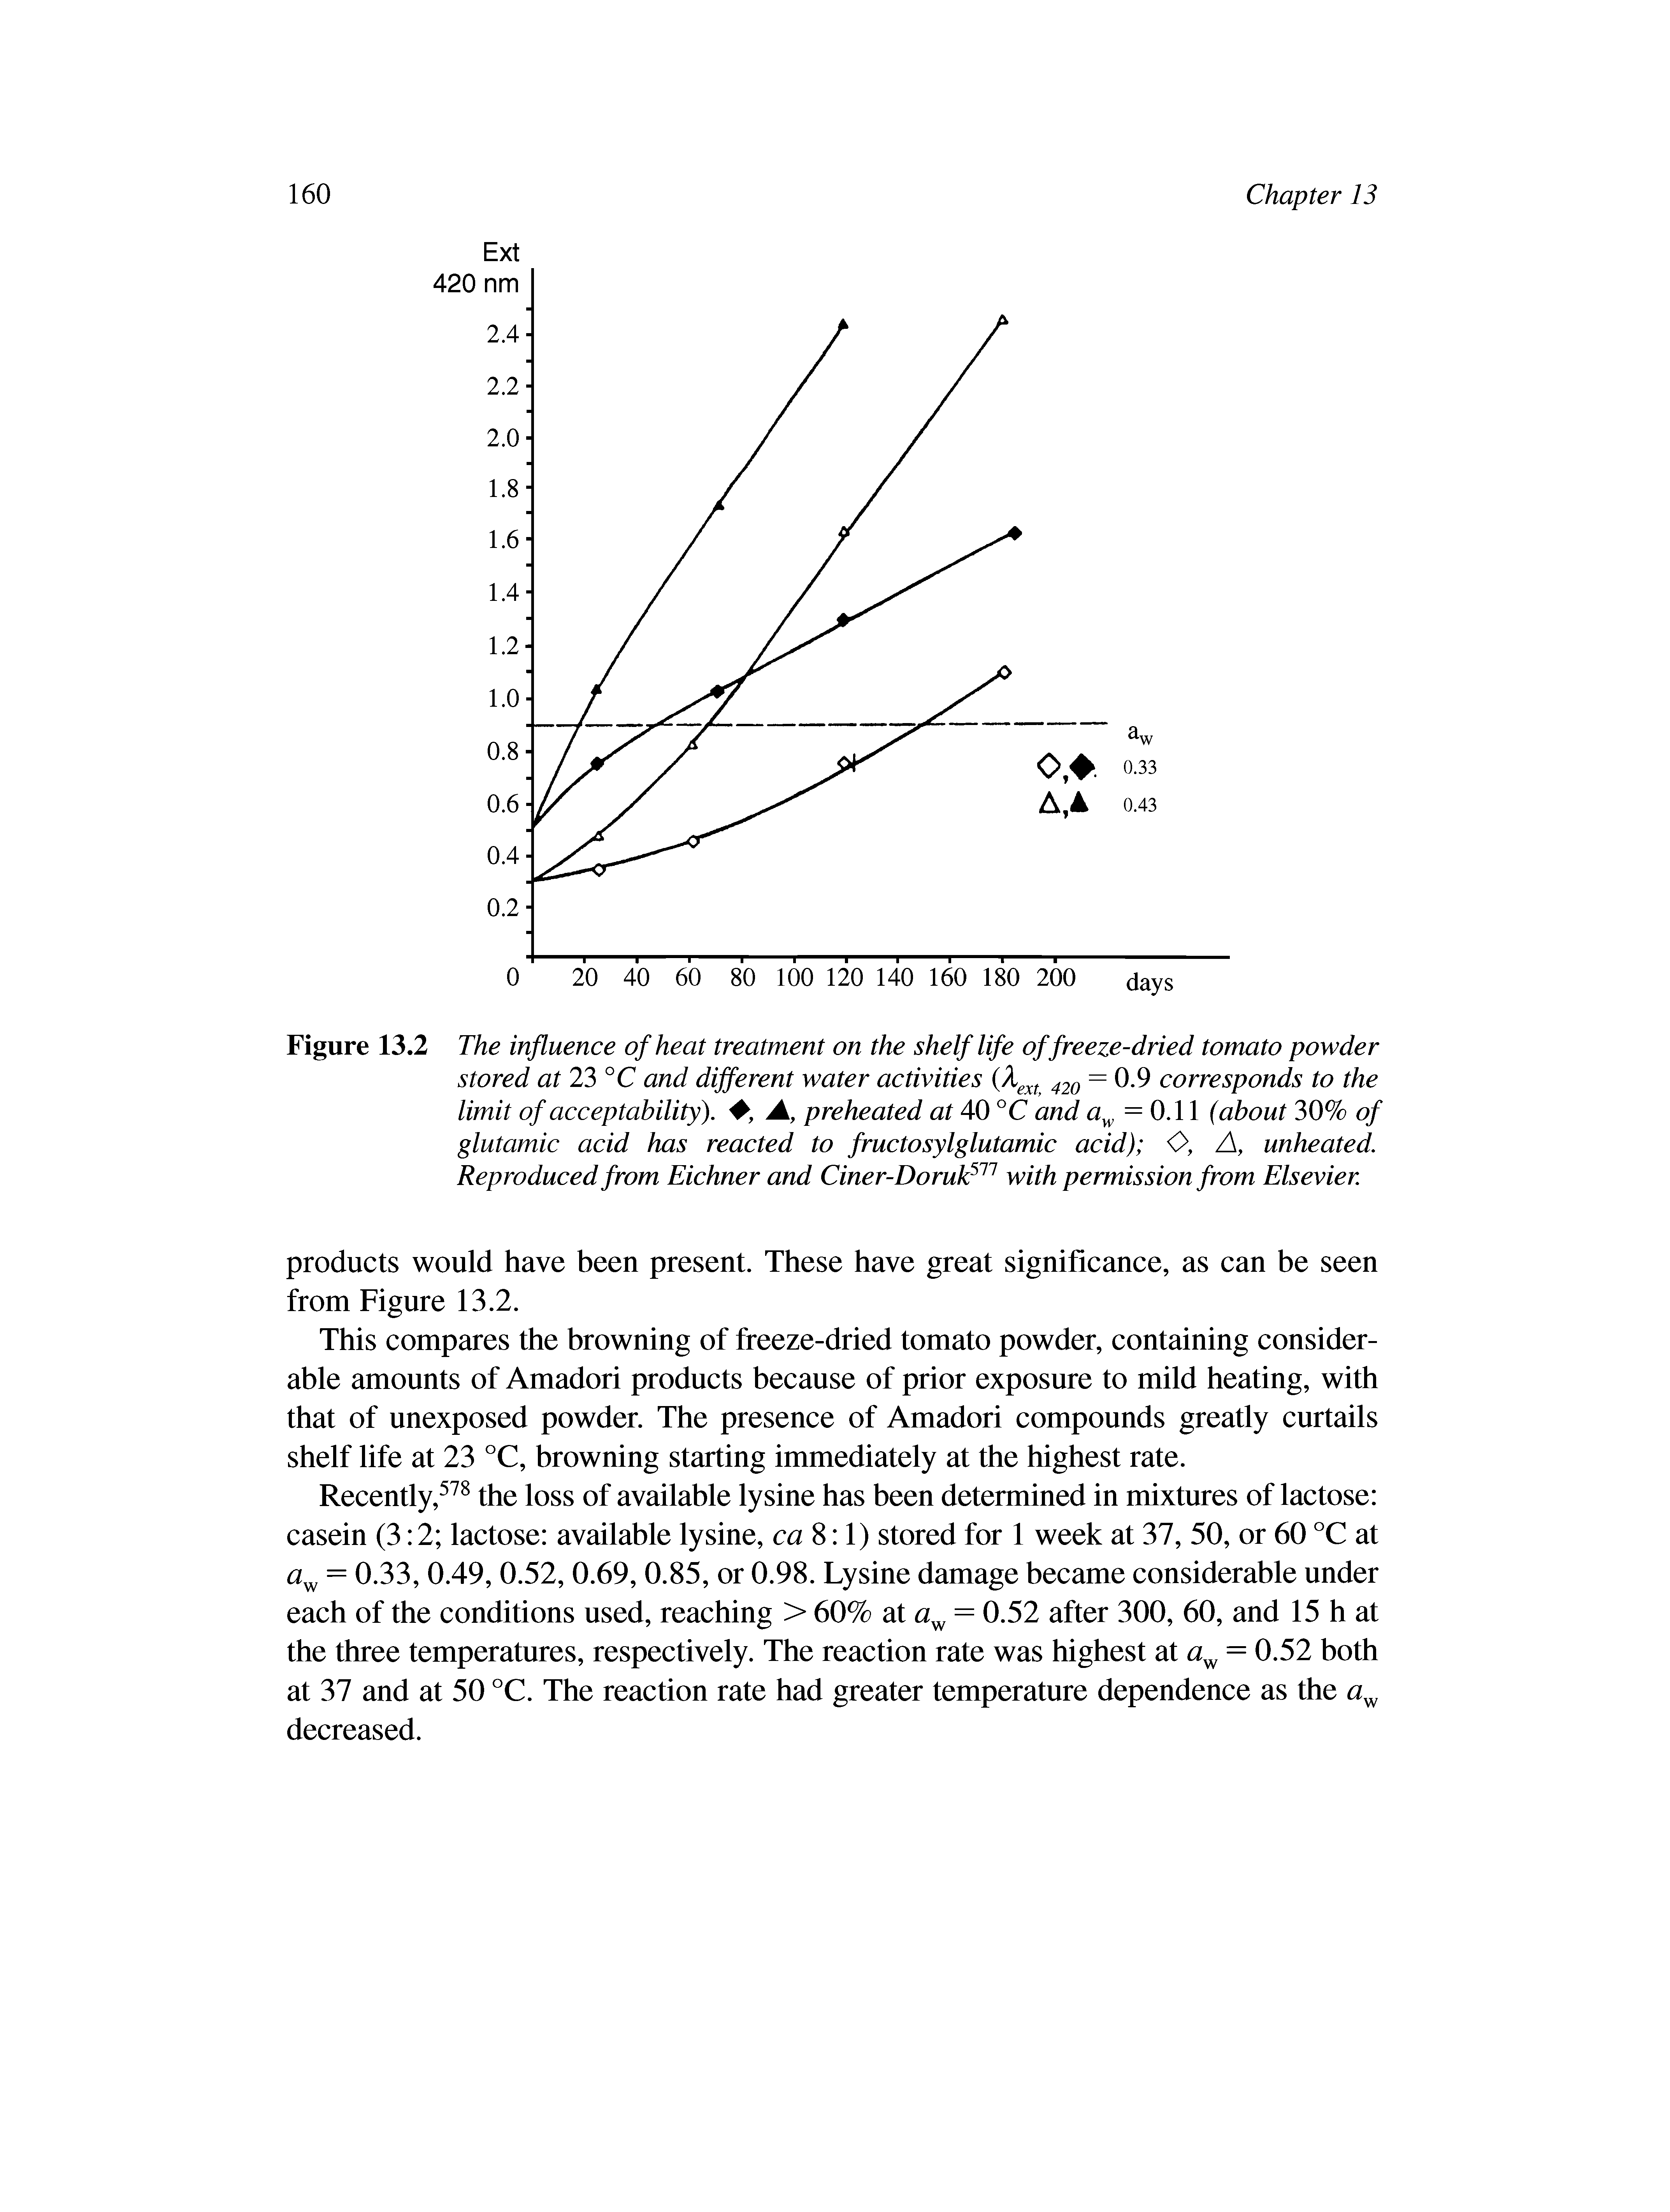 Figure 13.2 The influence of heat treatment on the shelf life of freeze-dried tomato powder stored at 23 °C and different water activities (Xext> 420 = 0.9 corresponds to the limit of acceptability)., A, preheated at 40 °C and aw = 0.11 (about 30% of glutamic acid has reacted to fructosylglutamic acid) O, A, unheated. Reproduced from Eichner and Ciner-Doruk577 with permission from Elsevier.